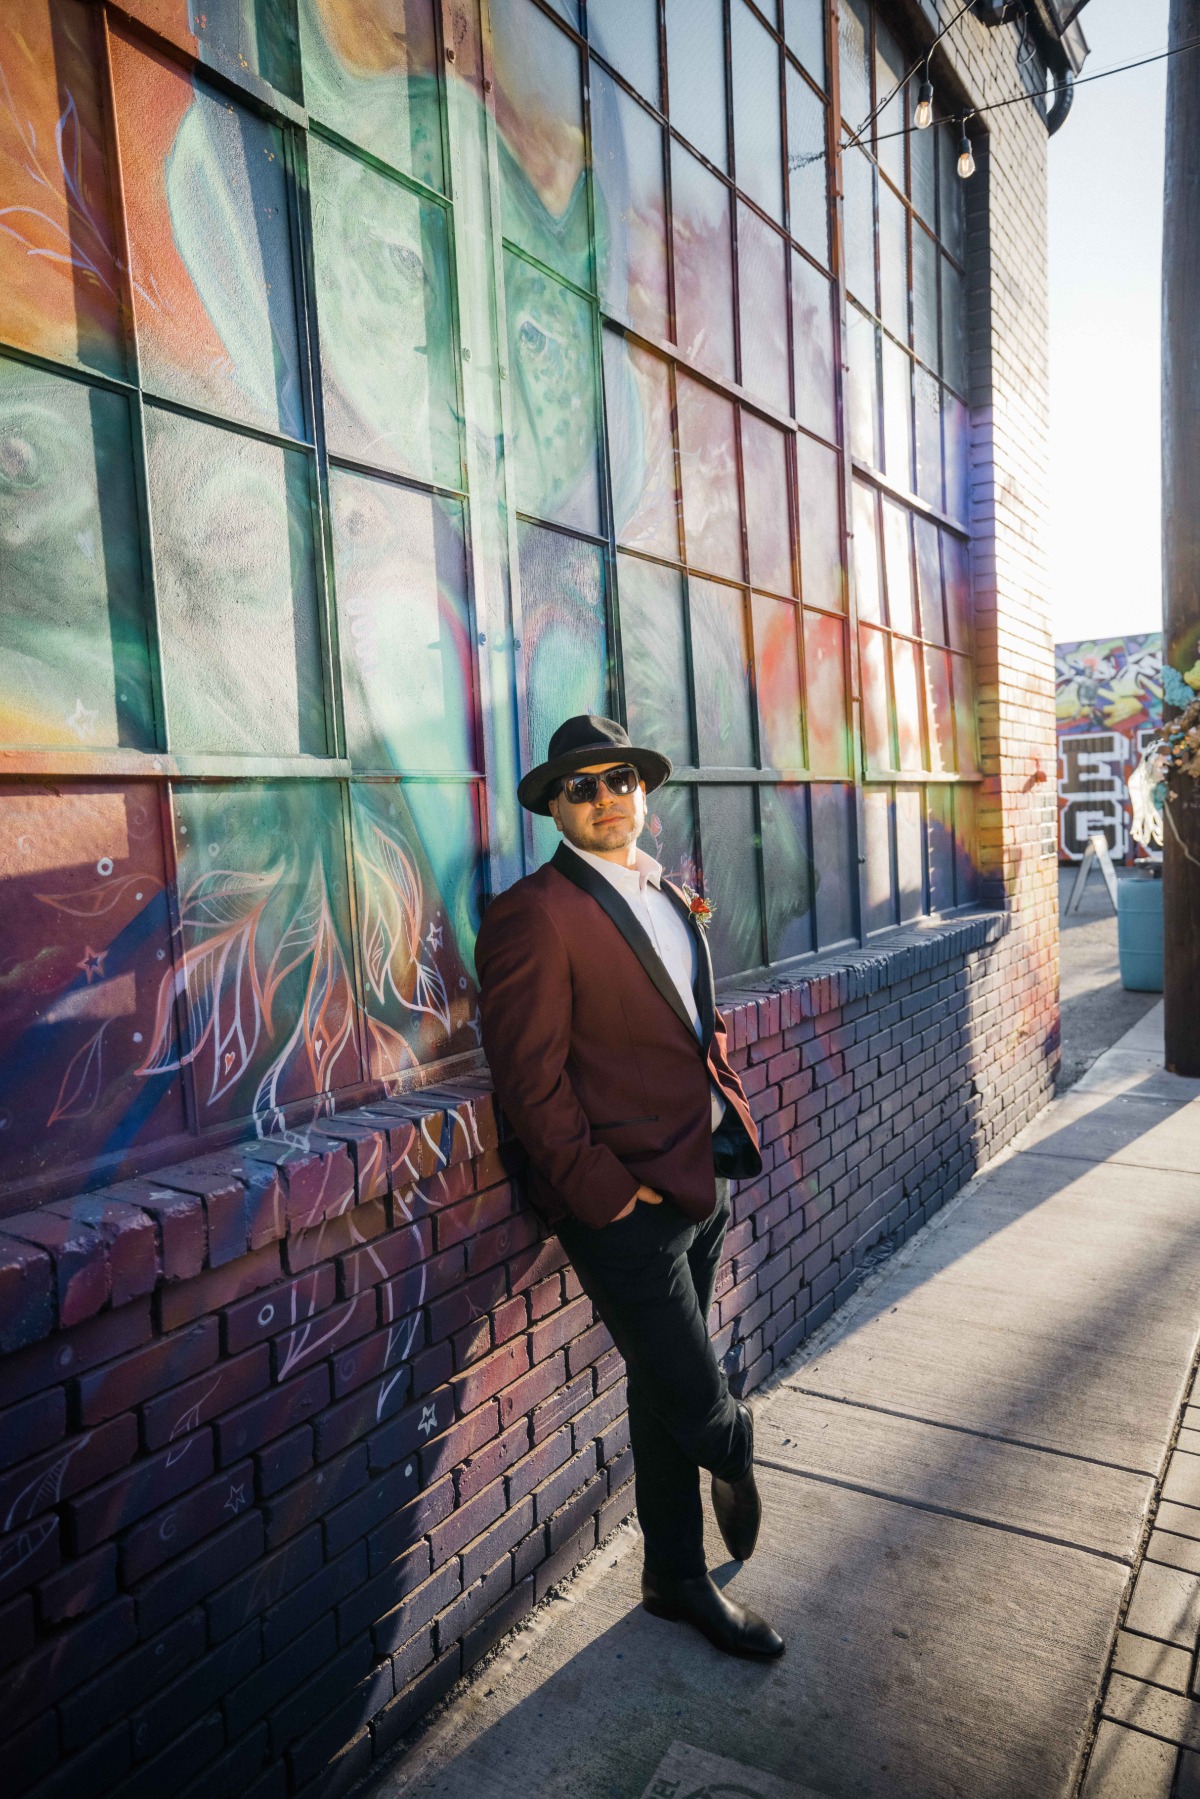 A Vibrant Elopement In The Heart Of Denver's Arts District